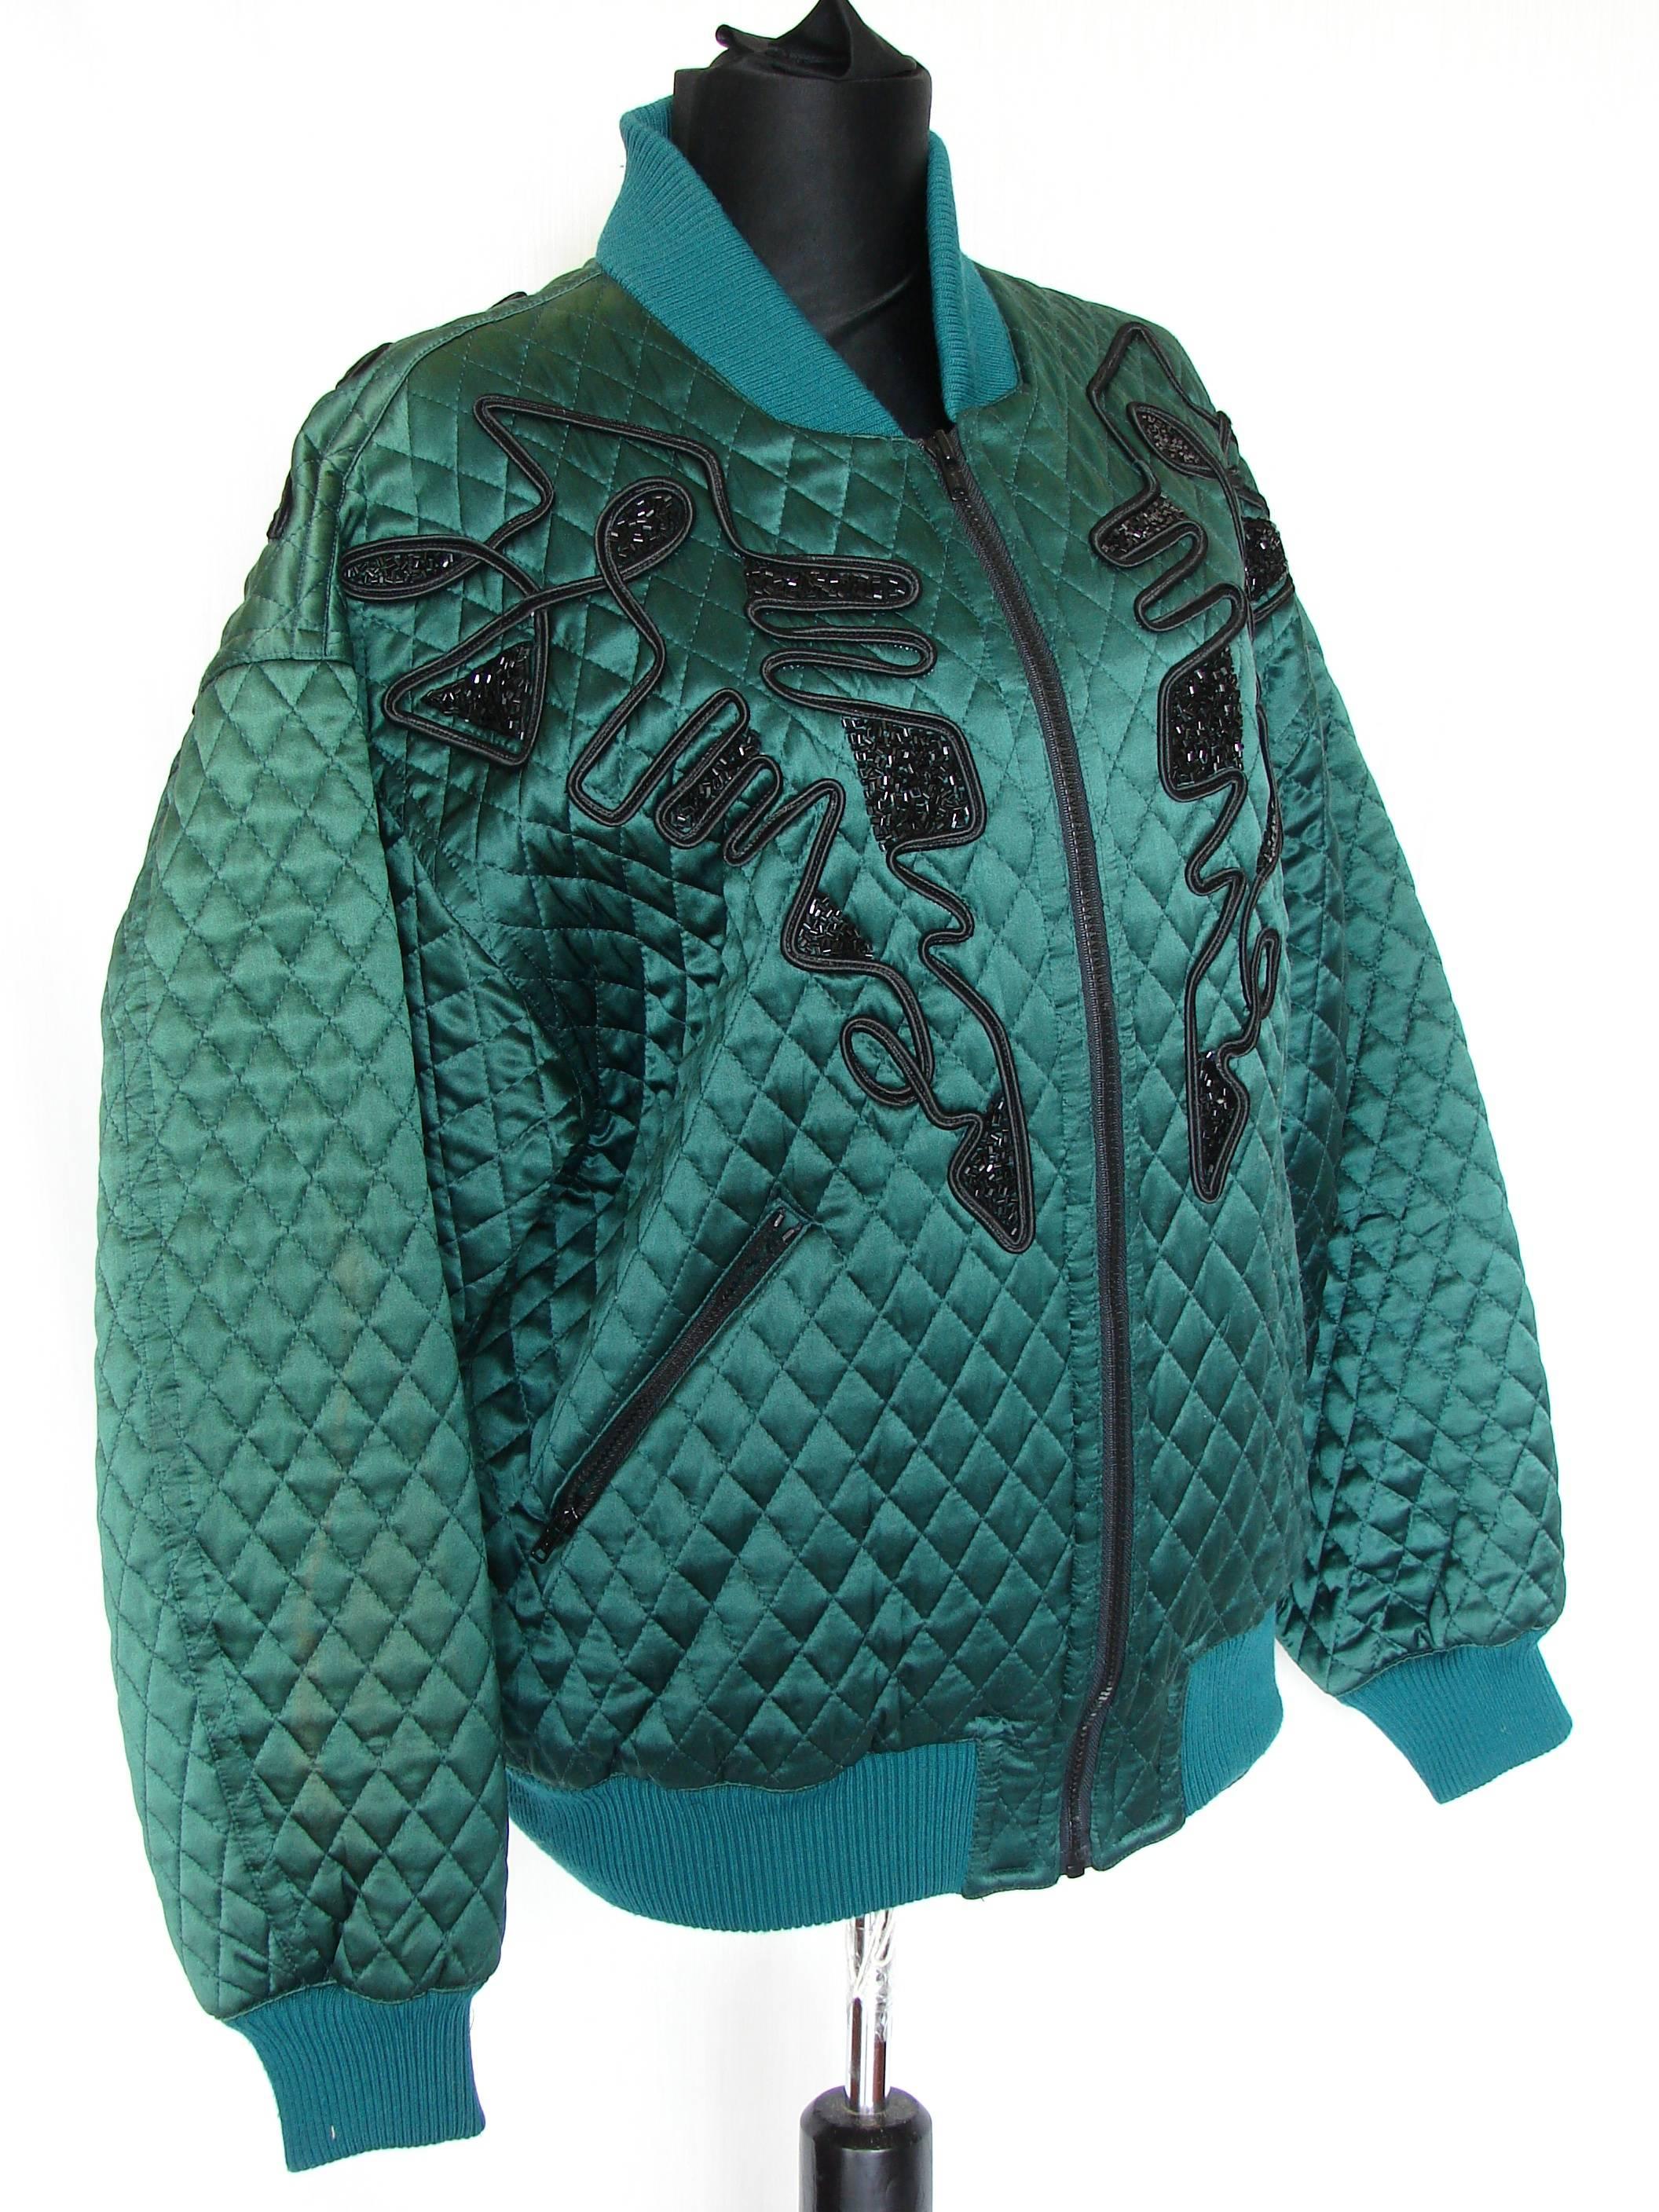 This emerald silk jacket with black bead design by Kansai Yamamoto was made in the 1980s.  In good condition overall, we note one area of fading on the back, left side of the jacket, measuring appx .5